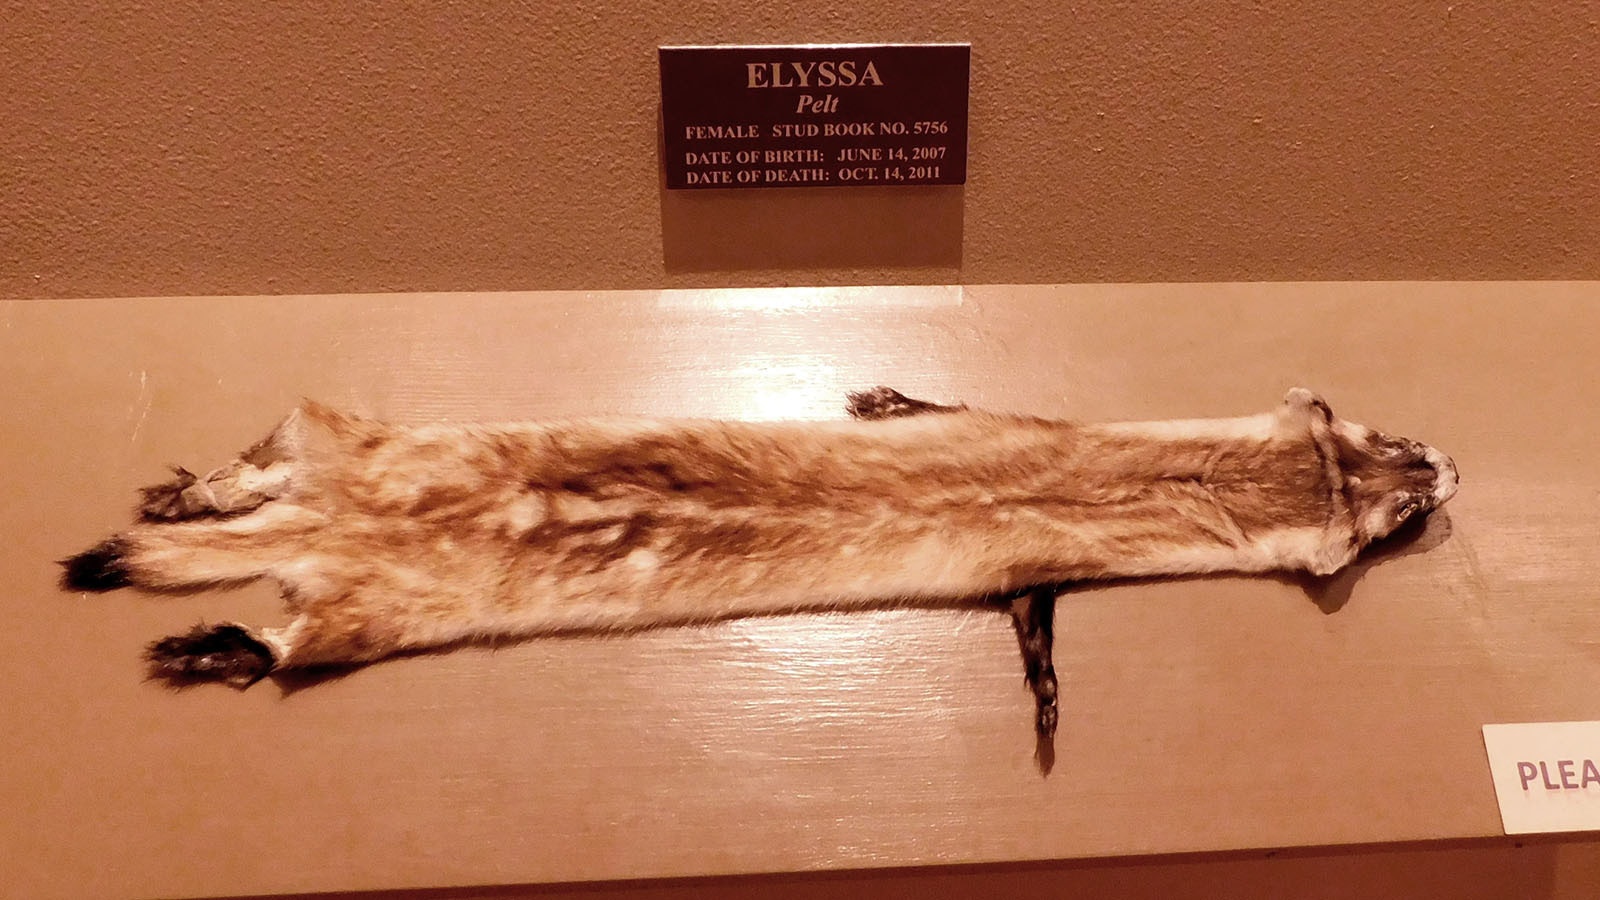 The pelt of Elyssa, the black-footed ferret on display at the Meeteetse Museums. This pelt was stolen from the museum, but thankfully undamaged by the ordeal and has since been returned to the museum.